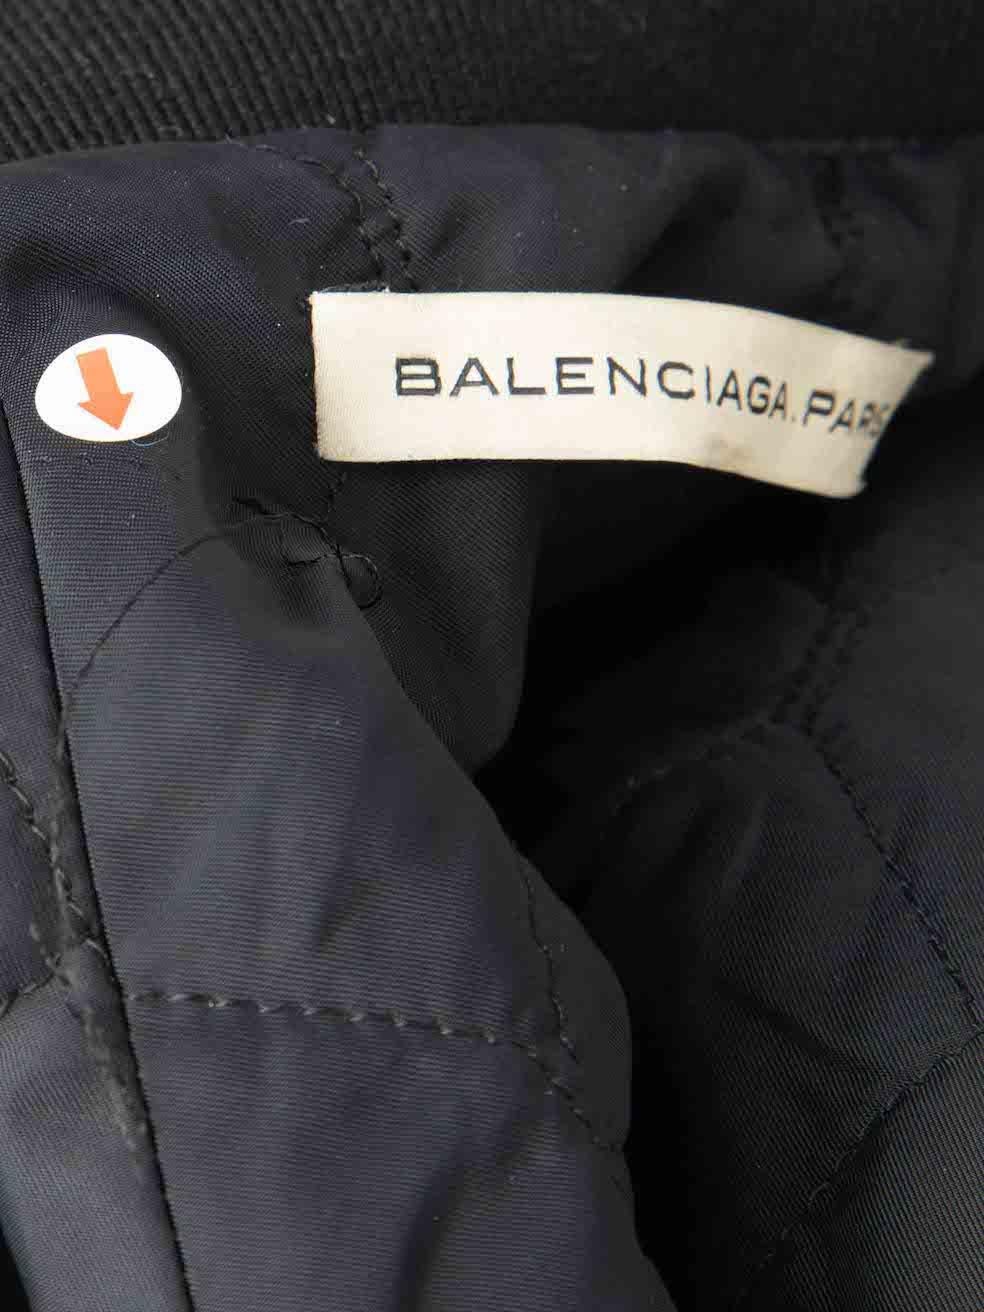 Balenciaga Black Join a Weird Trip Embroidery Jacket Size L For Sale 1